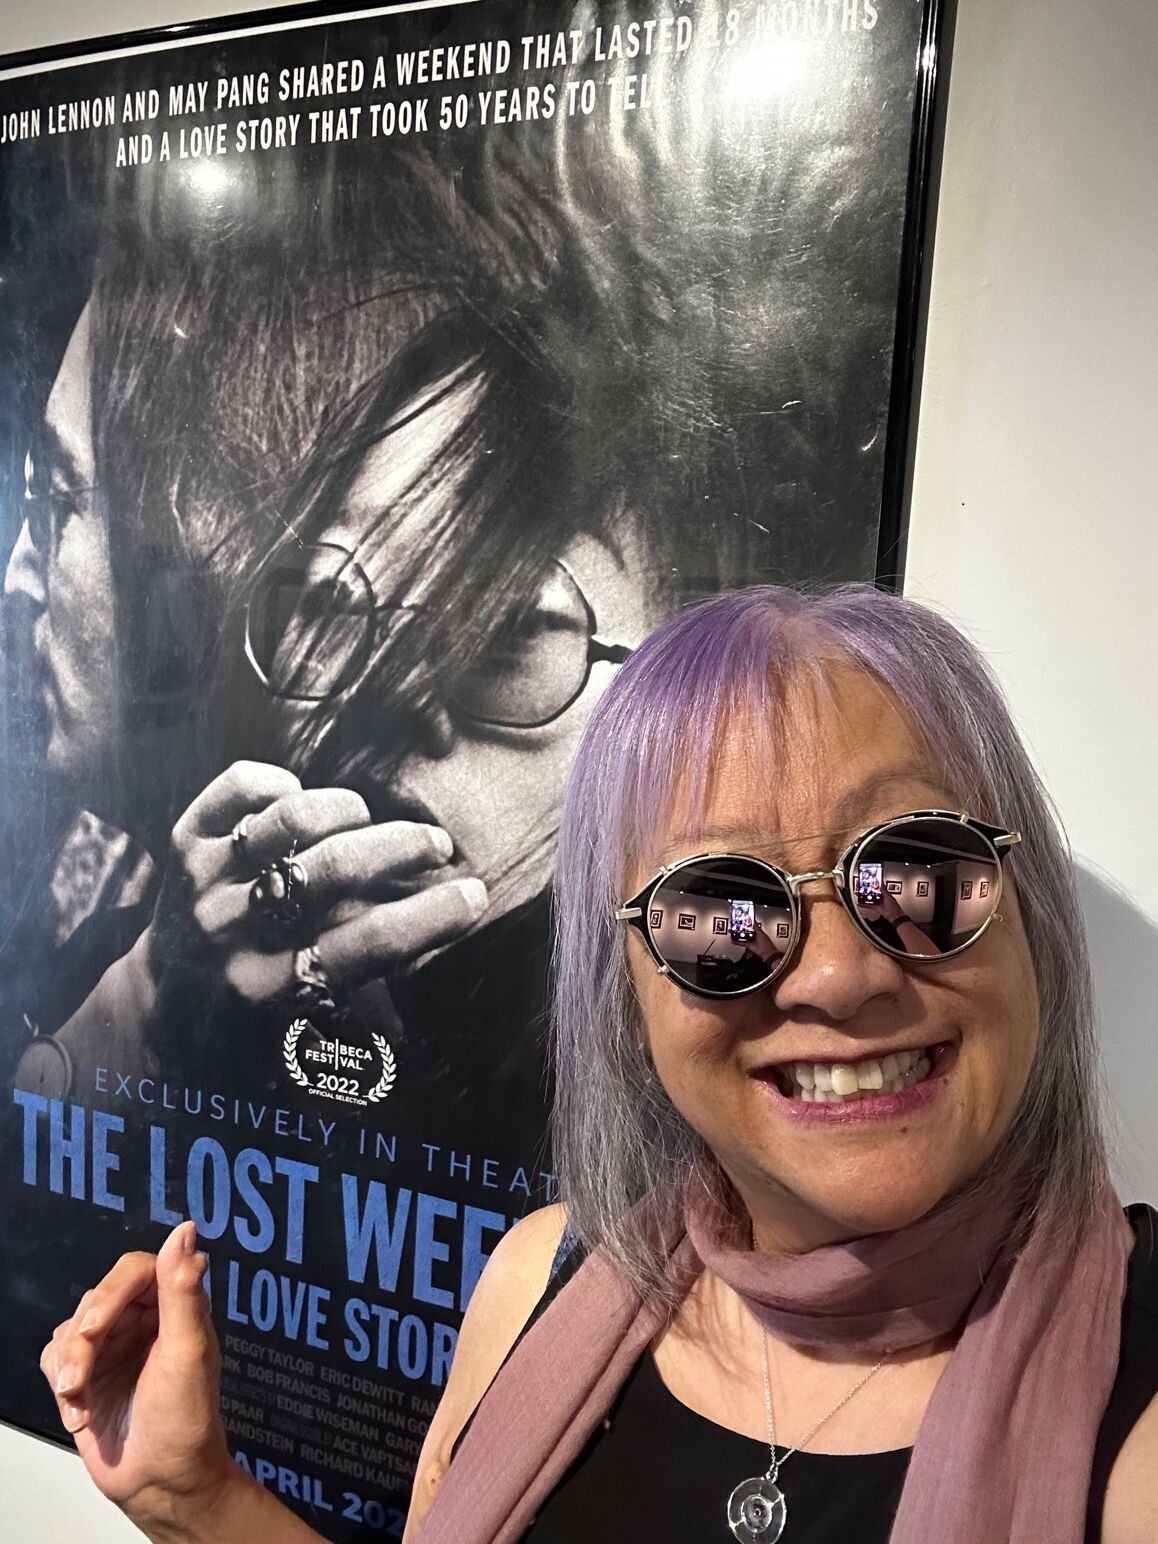 Tucson woman makes cameo in new film about John Lennon love affair